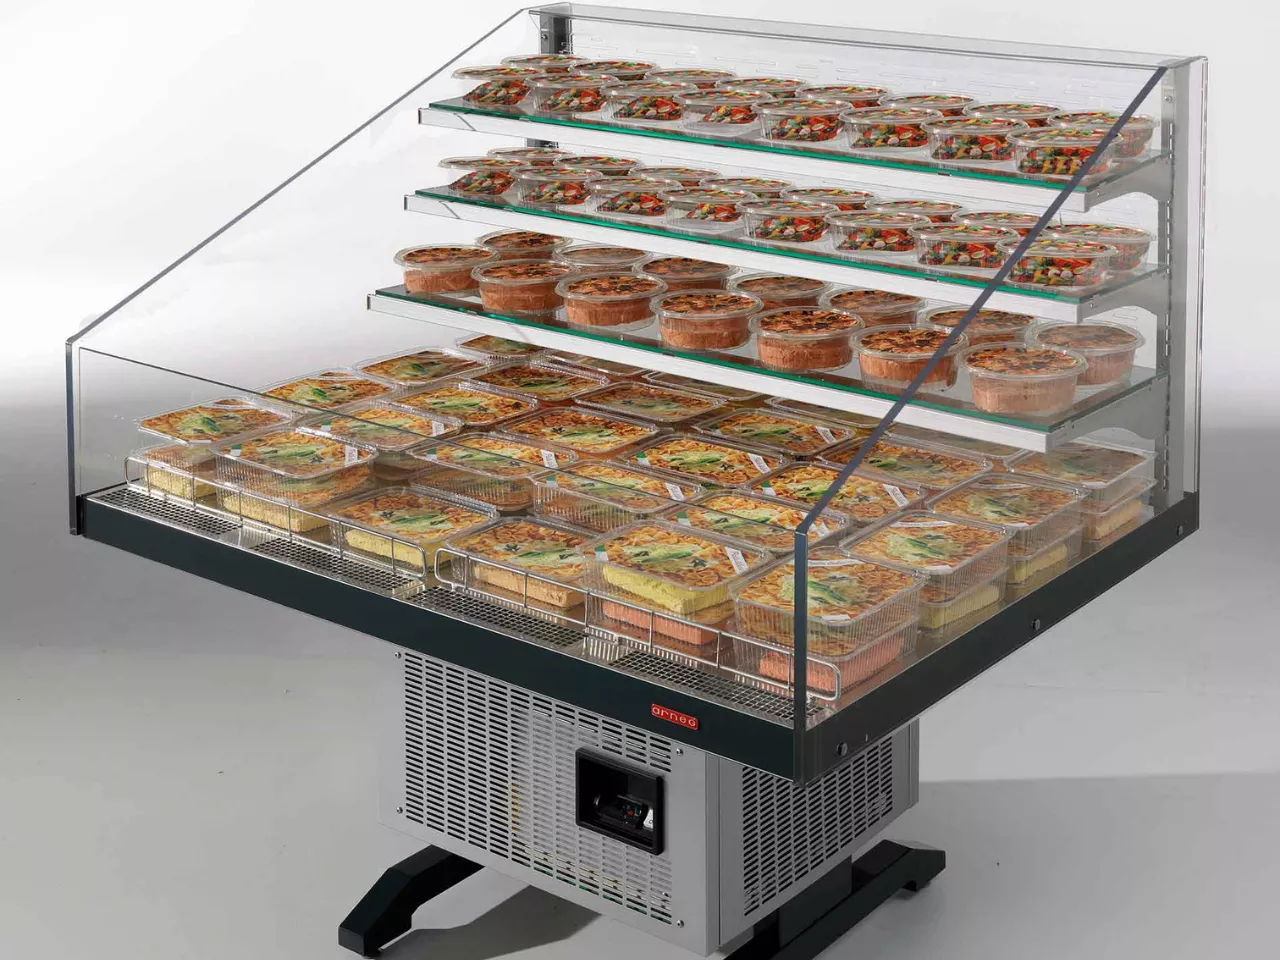 Arneg announces two new refrigerated cabinet lines